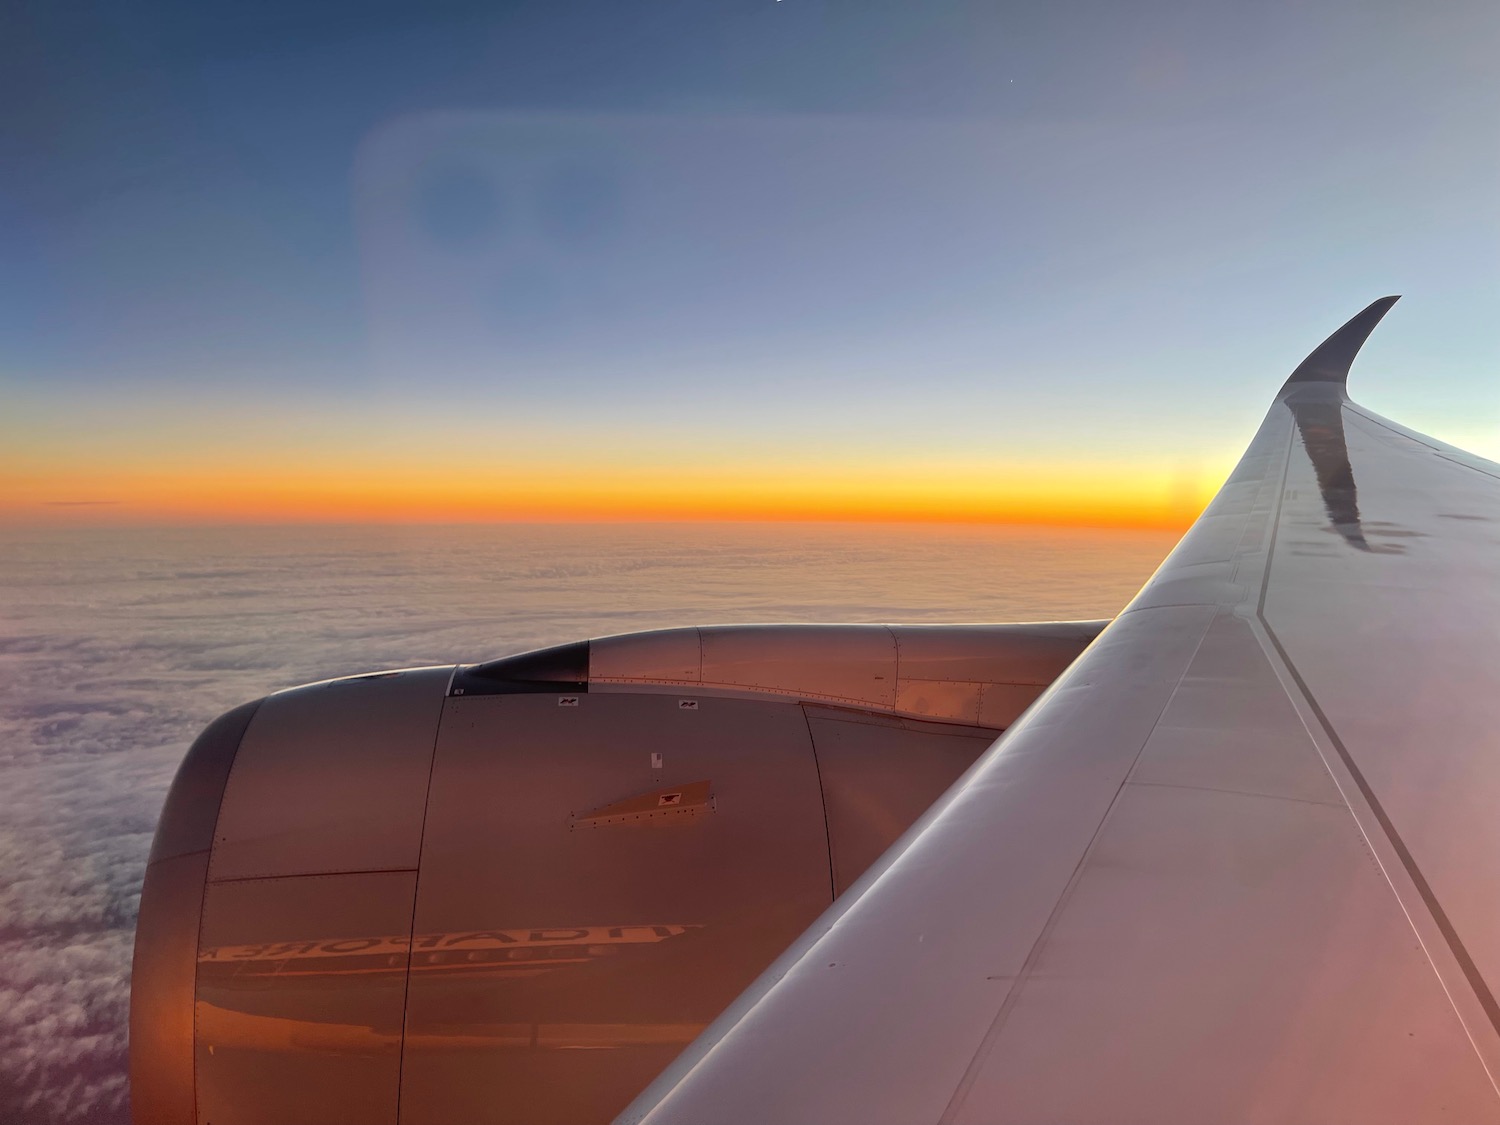 an airplane wing with the sun setting behind it